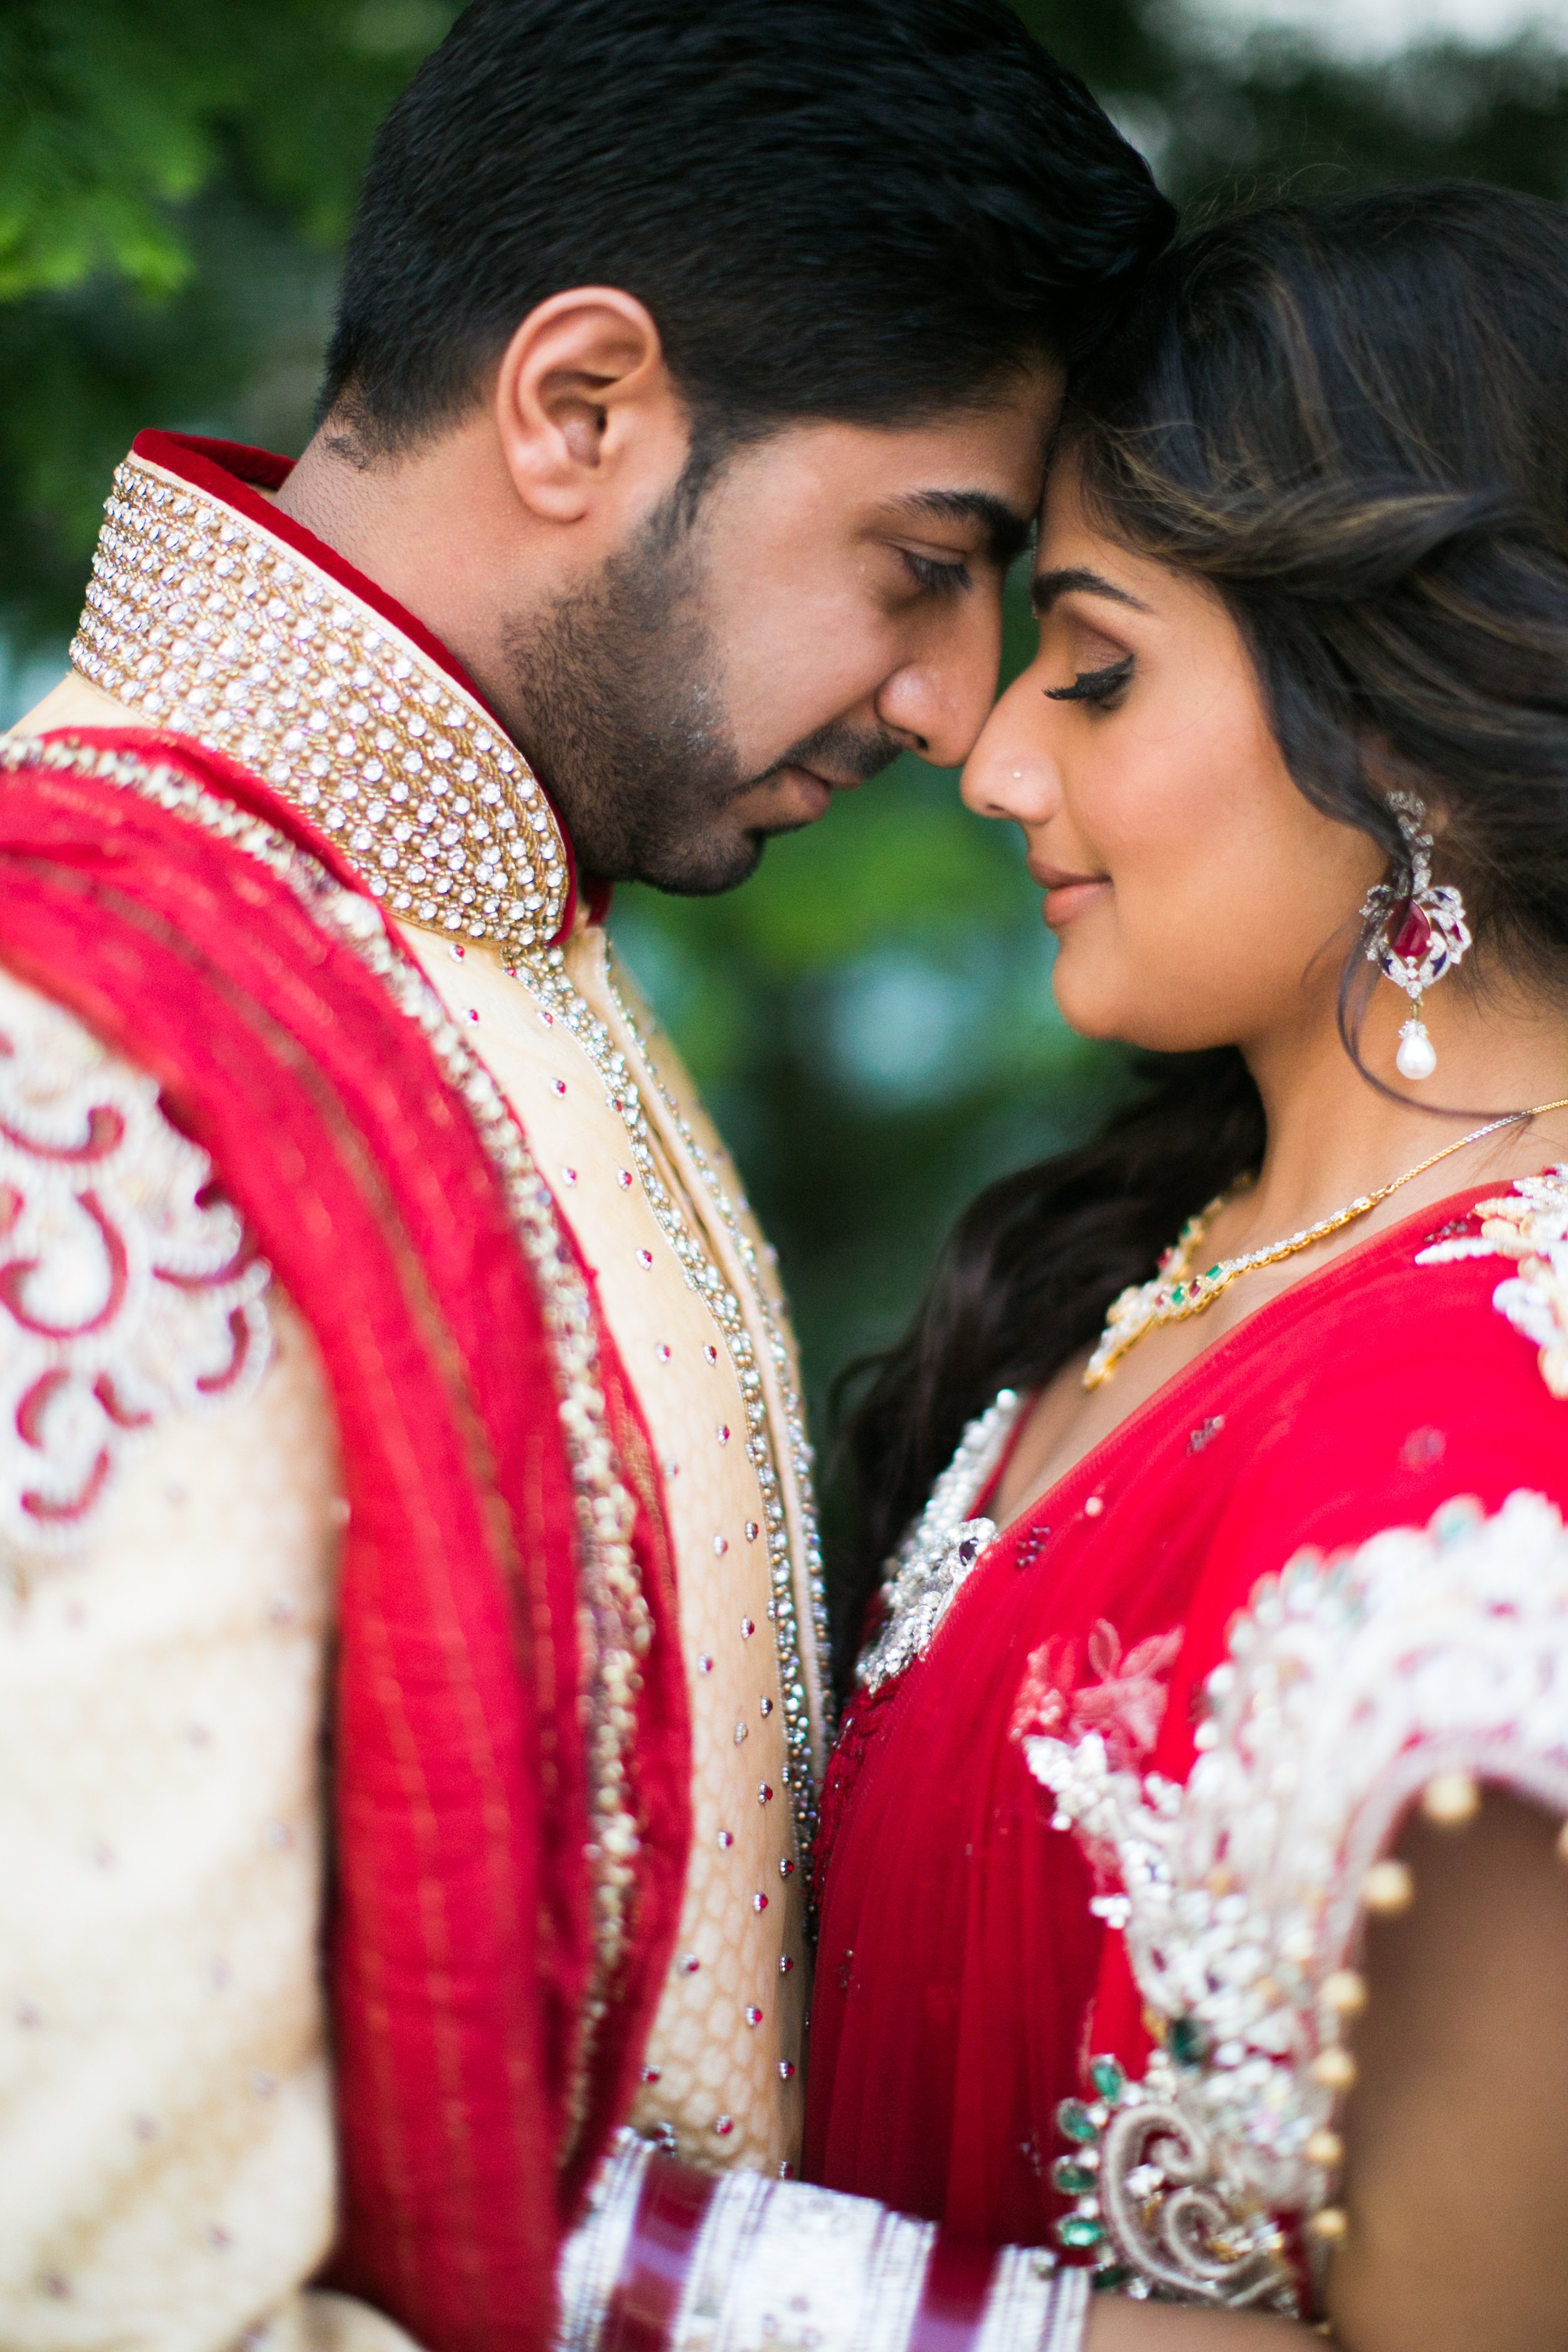 Lighting Basics for Photographing Indian Weddings - Twogether Studios